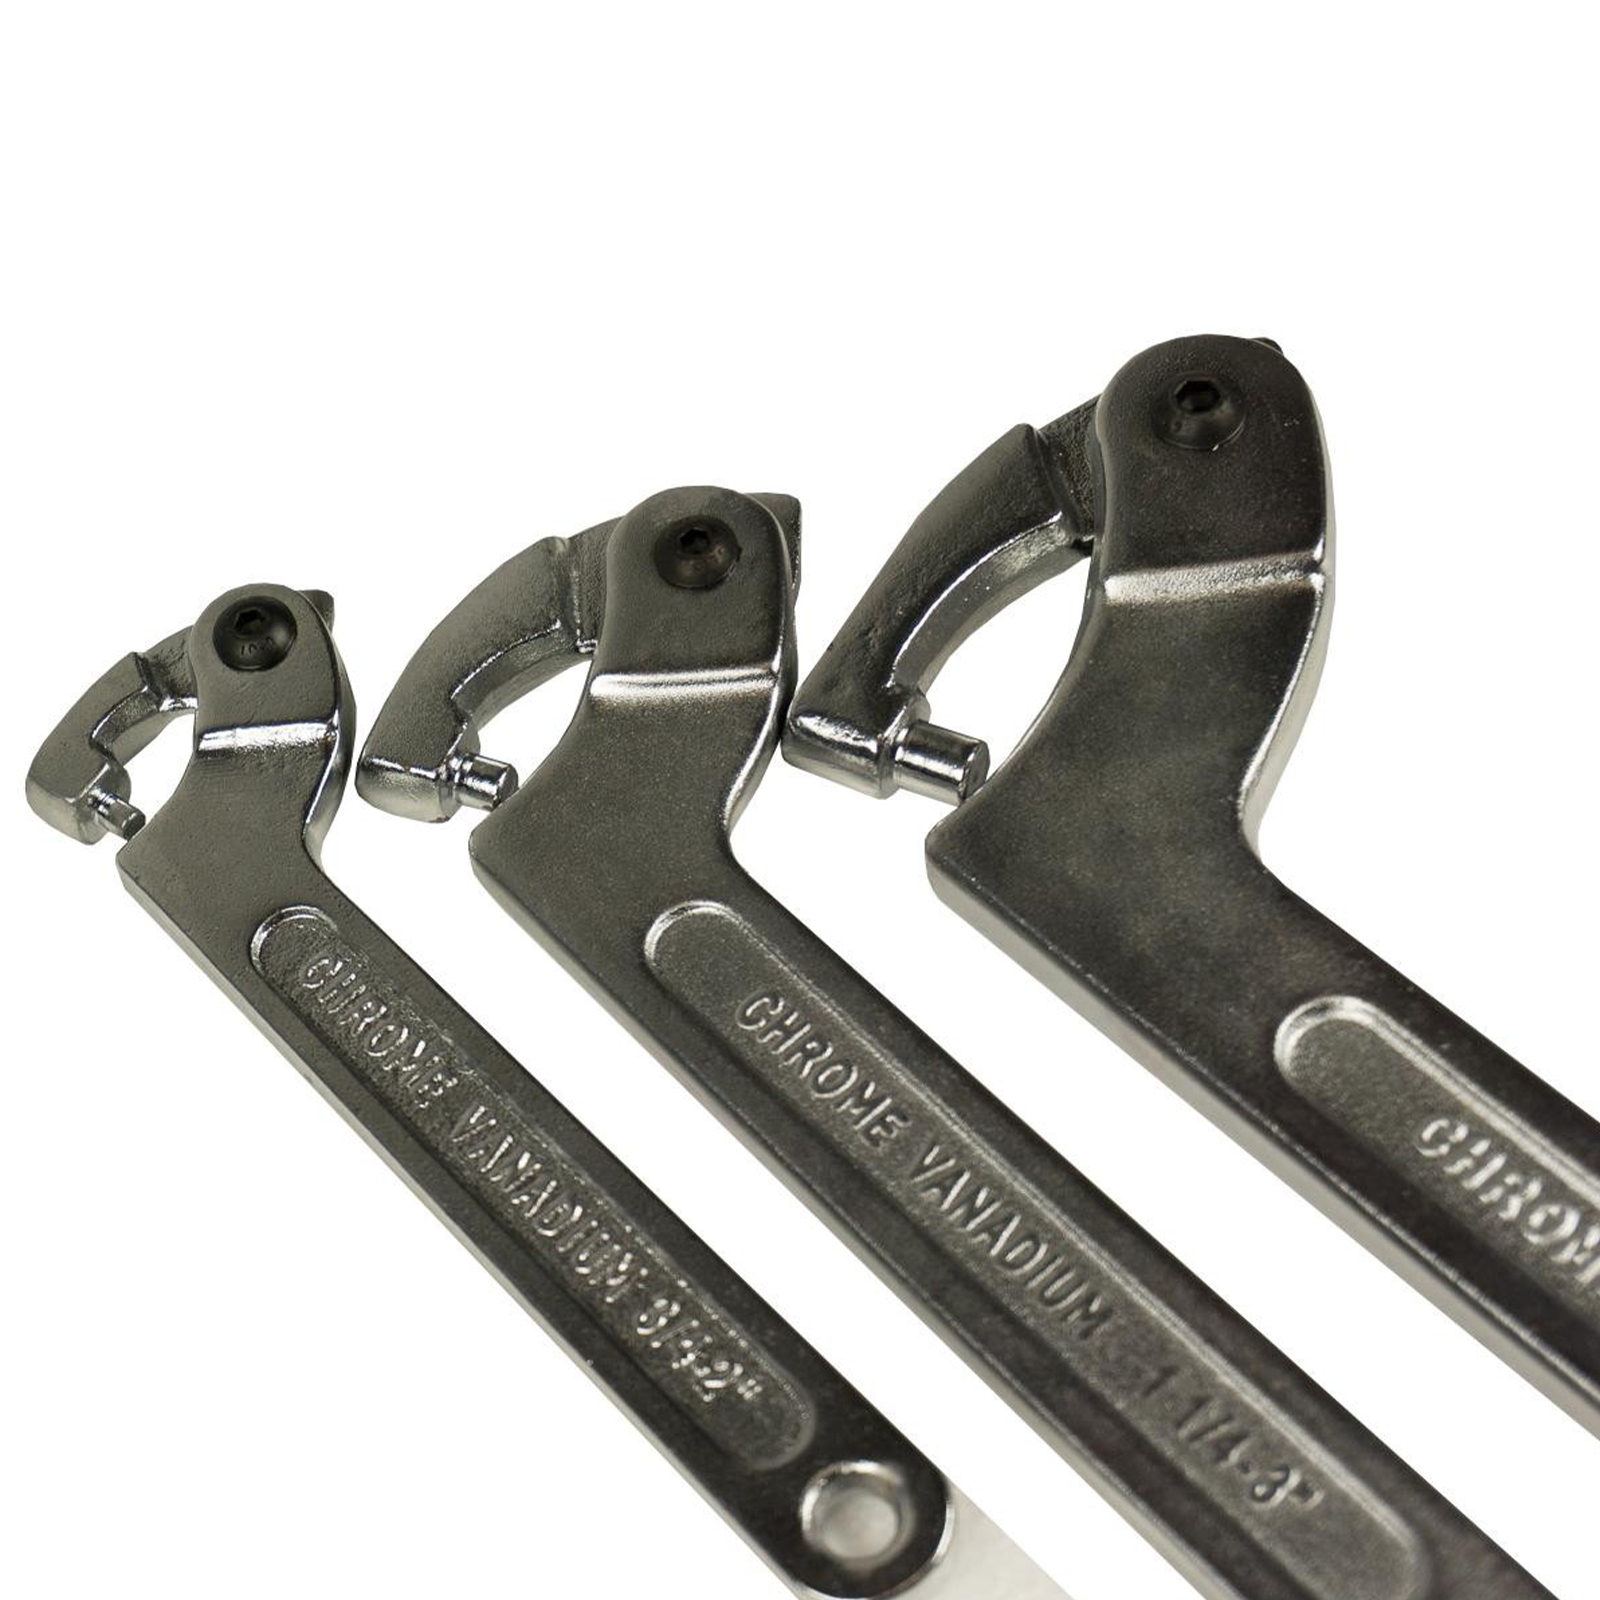 Adjustable Hook Pin Wrench C Spanner 32-76mm Round Tools 